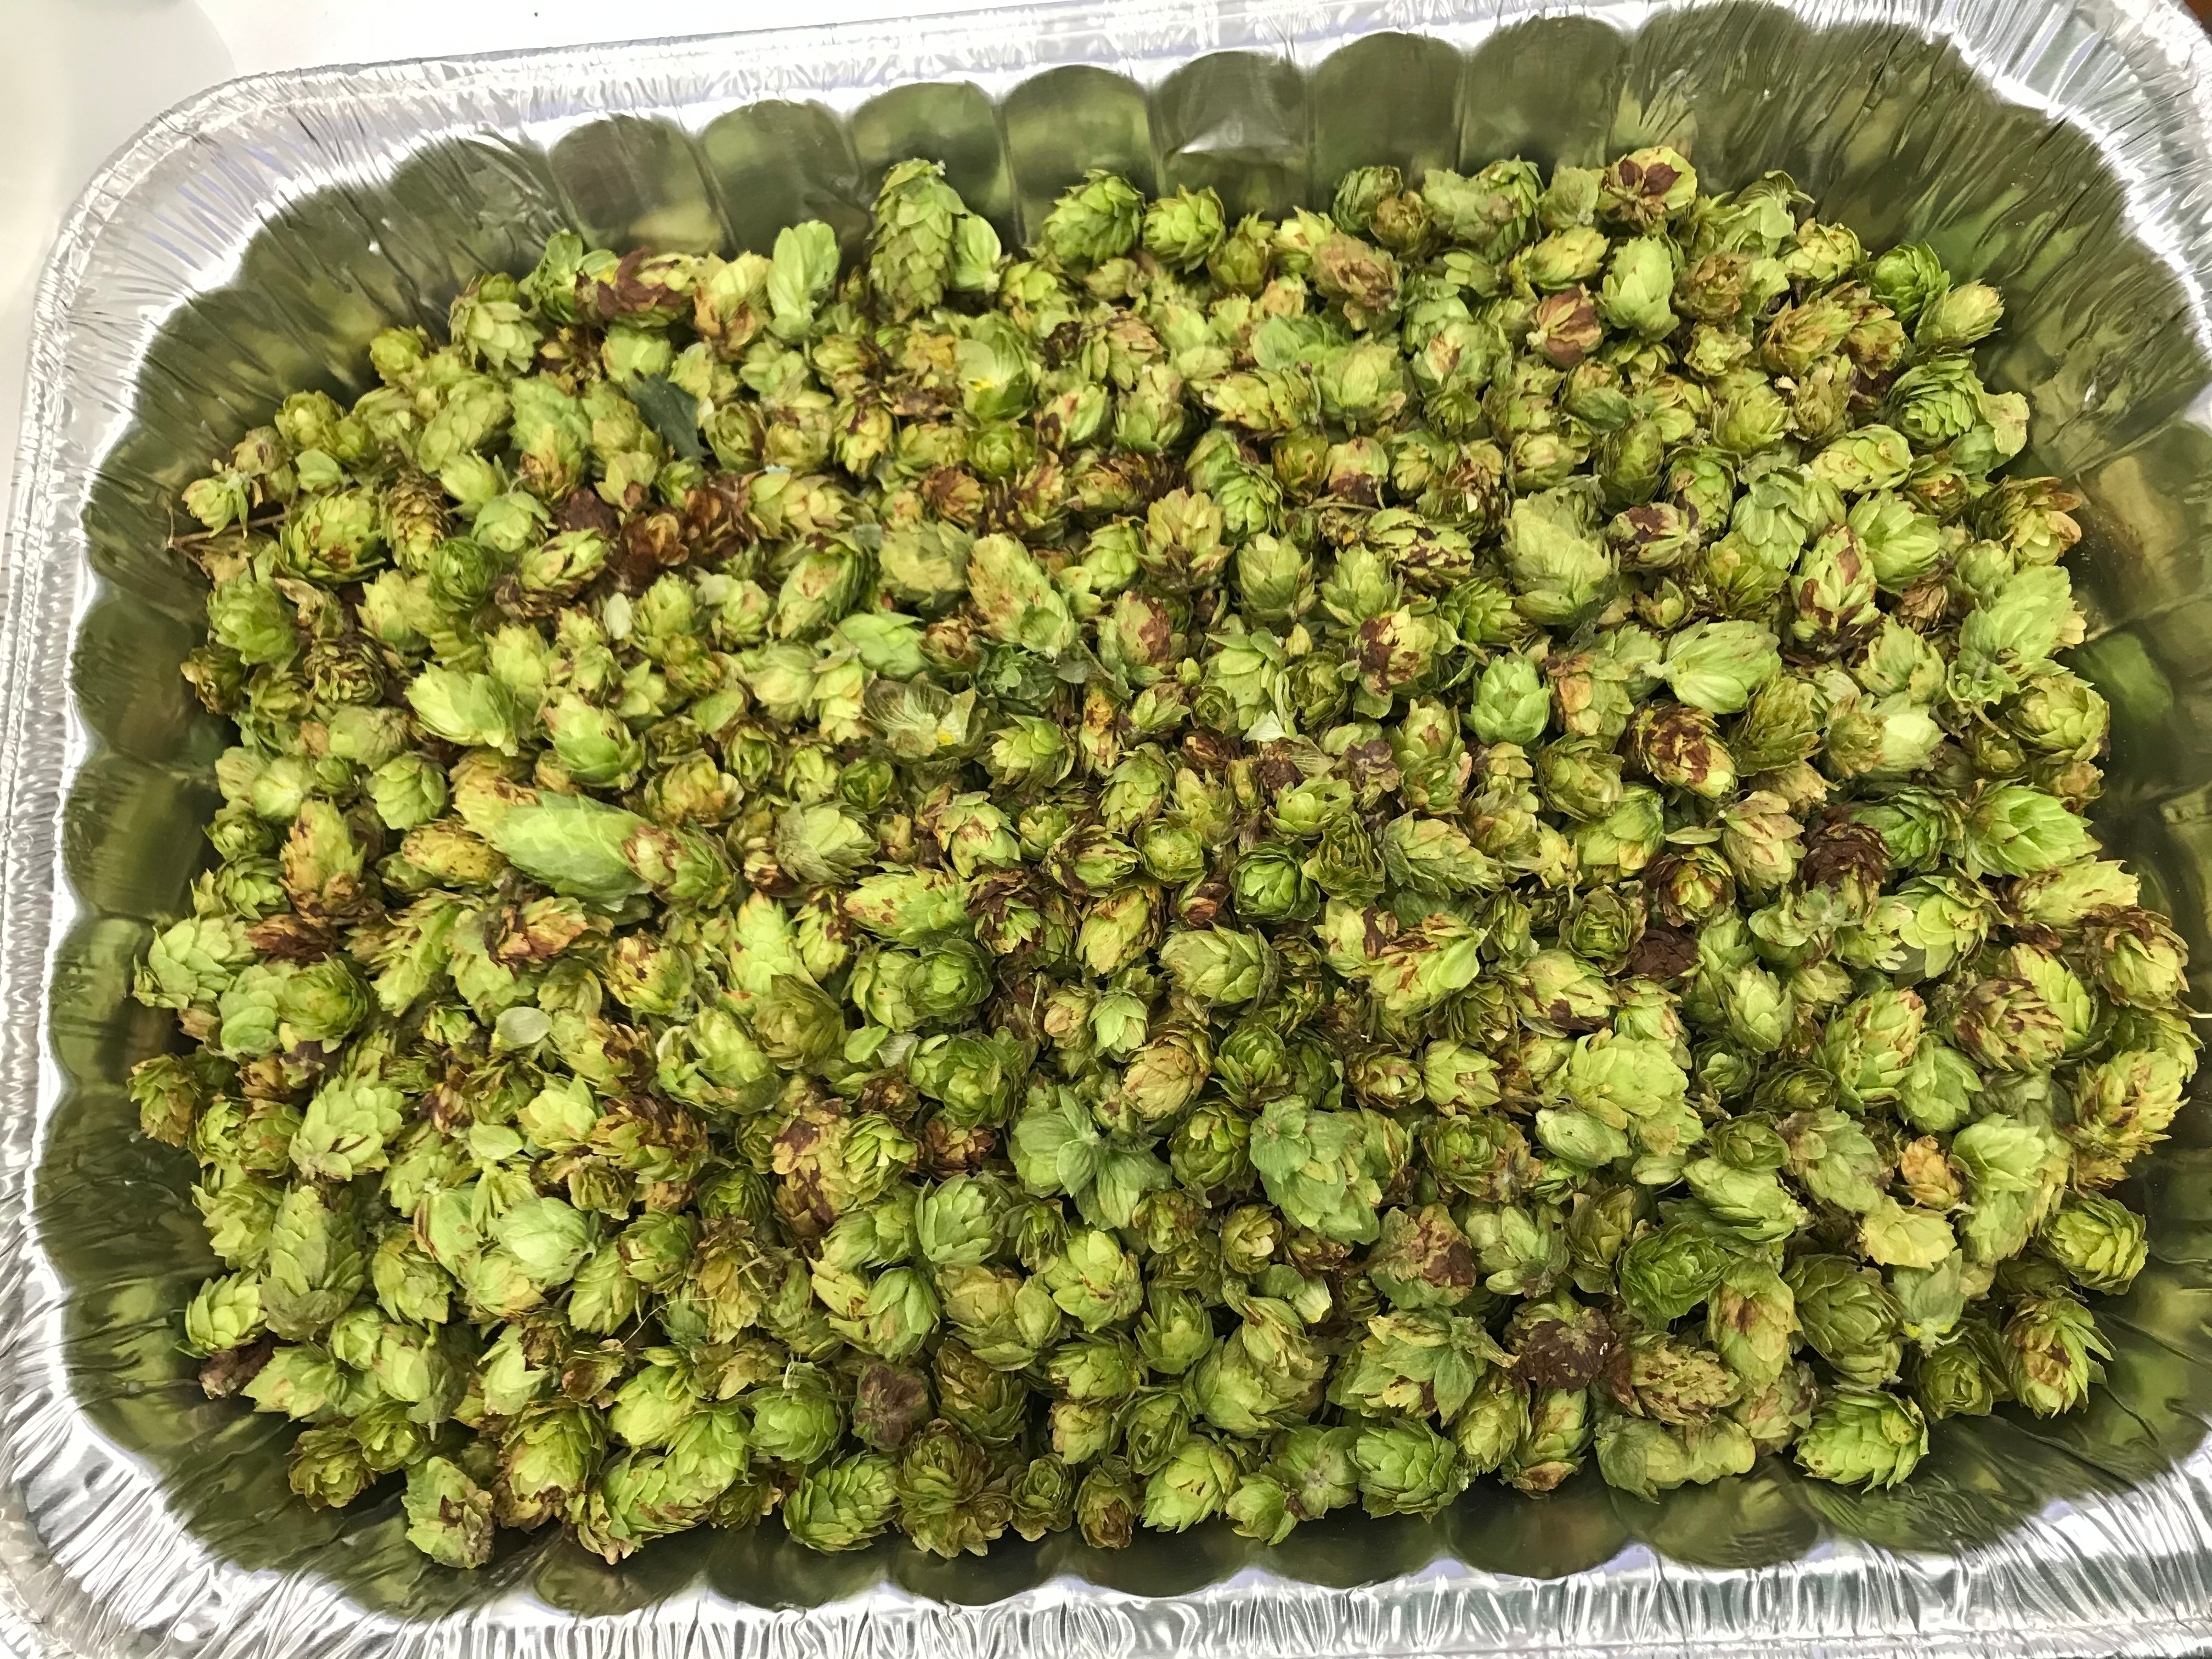 This photo shows an aluminum pan--imagine lasagna--full of hops, small pine cone-like flowers. The color is mostly a light green but some are darker or even a bit browned.